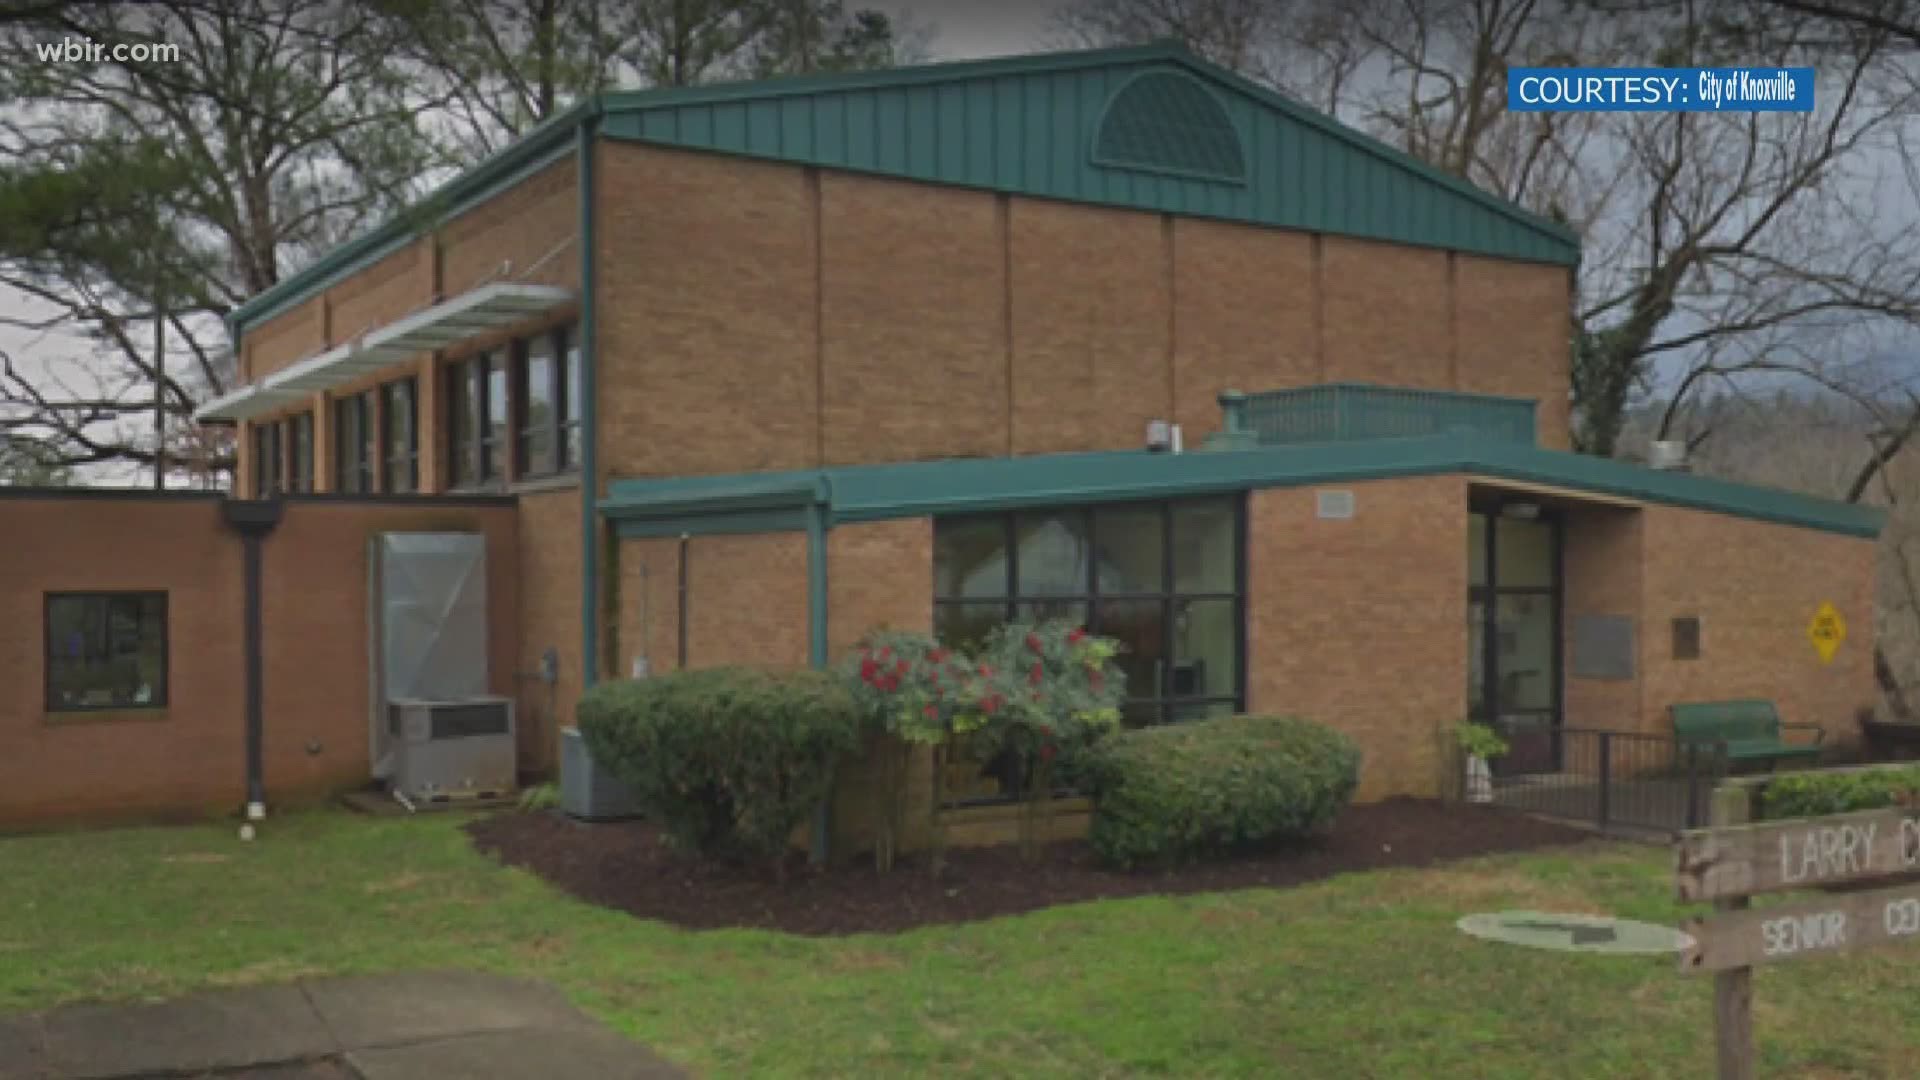 After a long year, two senior centers in Knoxville are now open again.